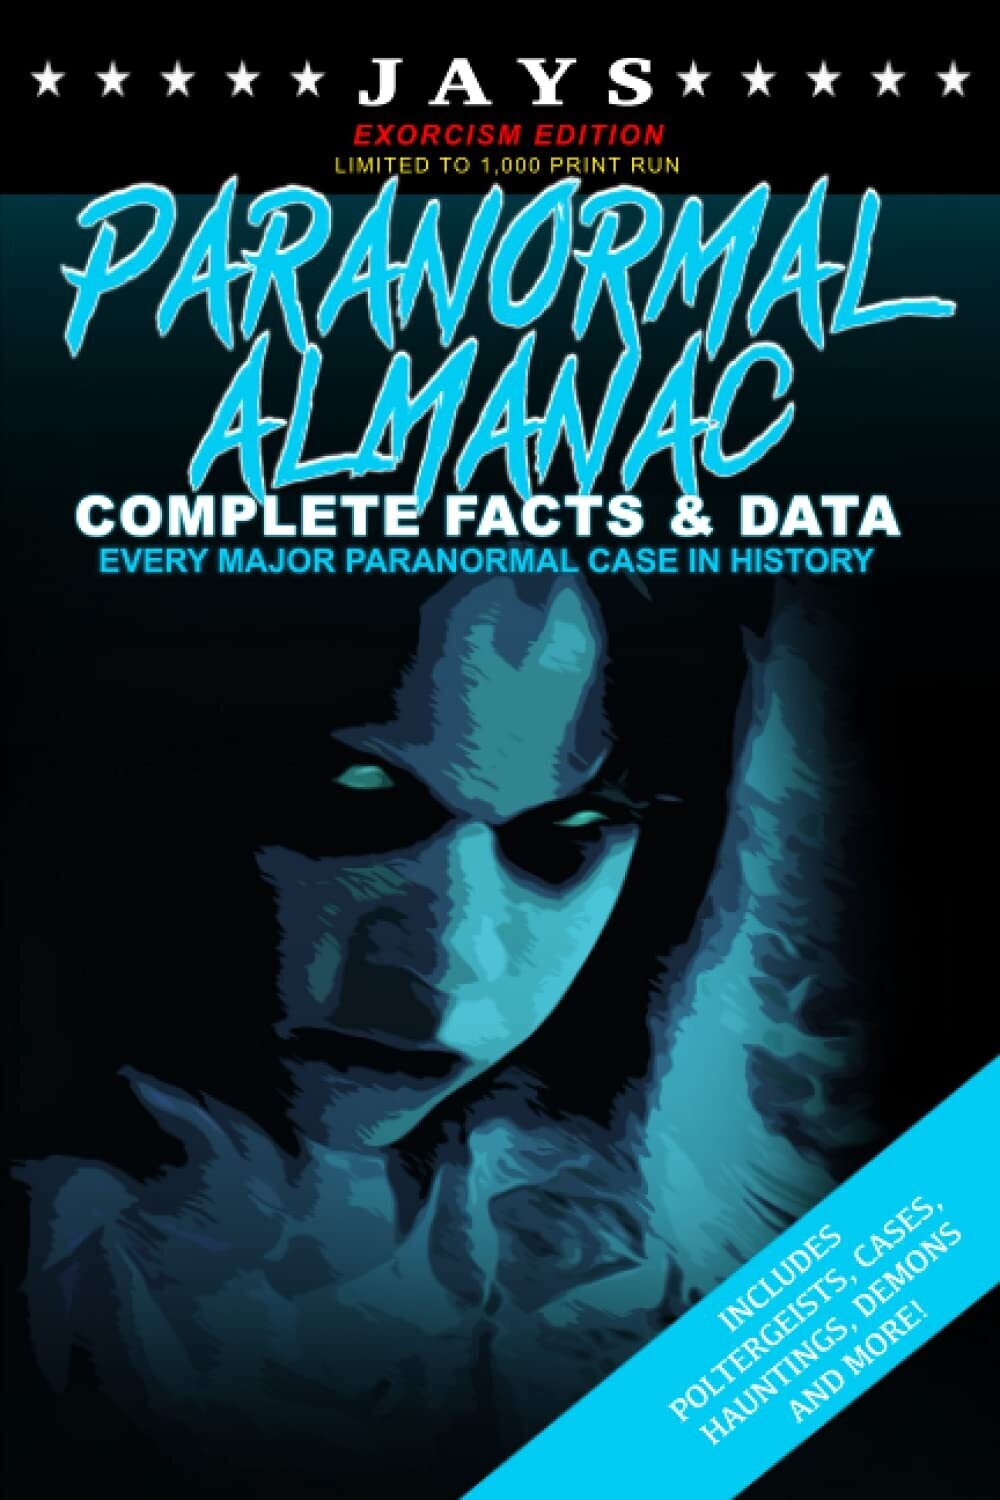 Jays Paranormal Almanac: Complete Facts & Data [#2 EXORCISM EDITION - LIMITED TO 1,000 PRINT RUN WORLDWIDE] [Paperback]